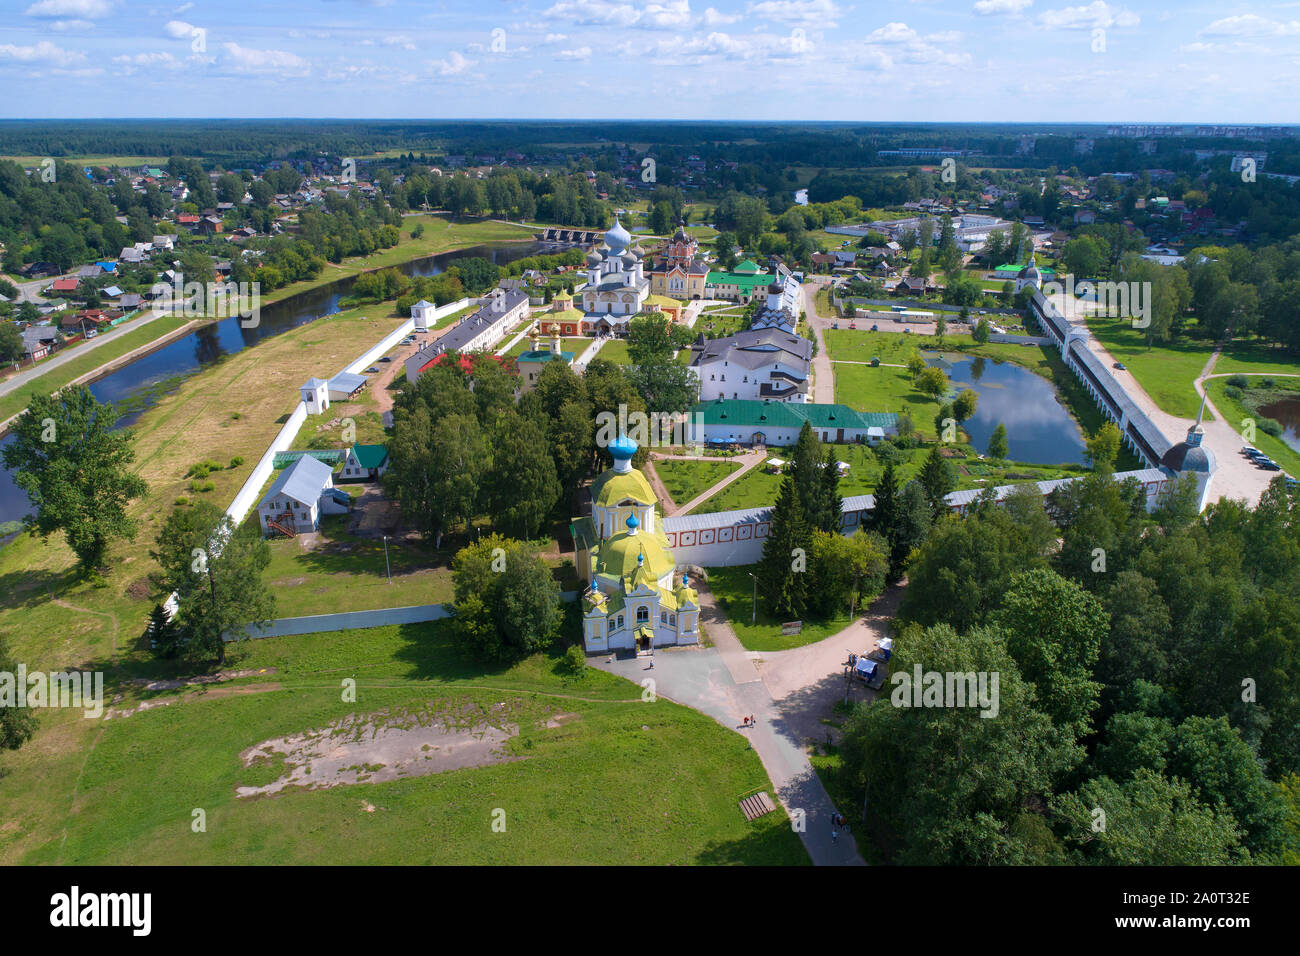 View of the Tikhvinsky Bogorodichny Uspensky monastery in the sunny July afternoon (shooting from the quadcopter). Tikhvin, Russia Stock Photo